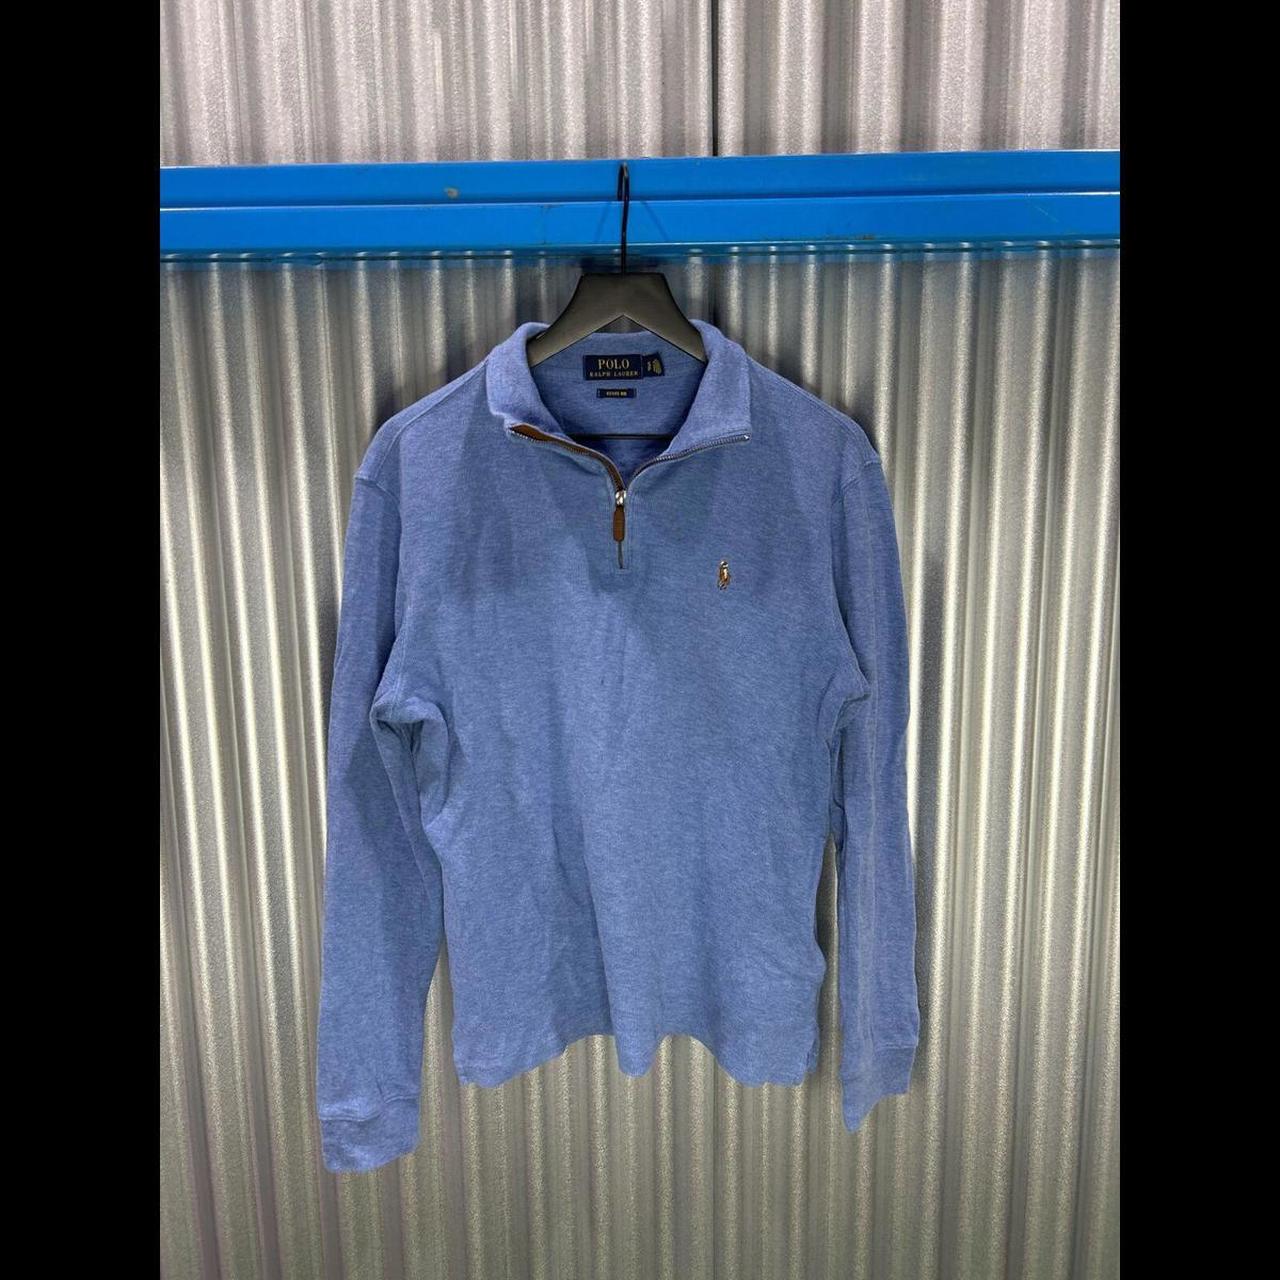 message for any inquiries regarding this item. Polo... - Depop